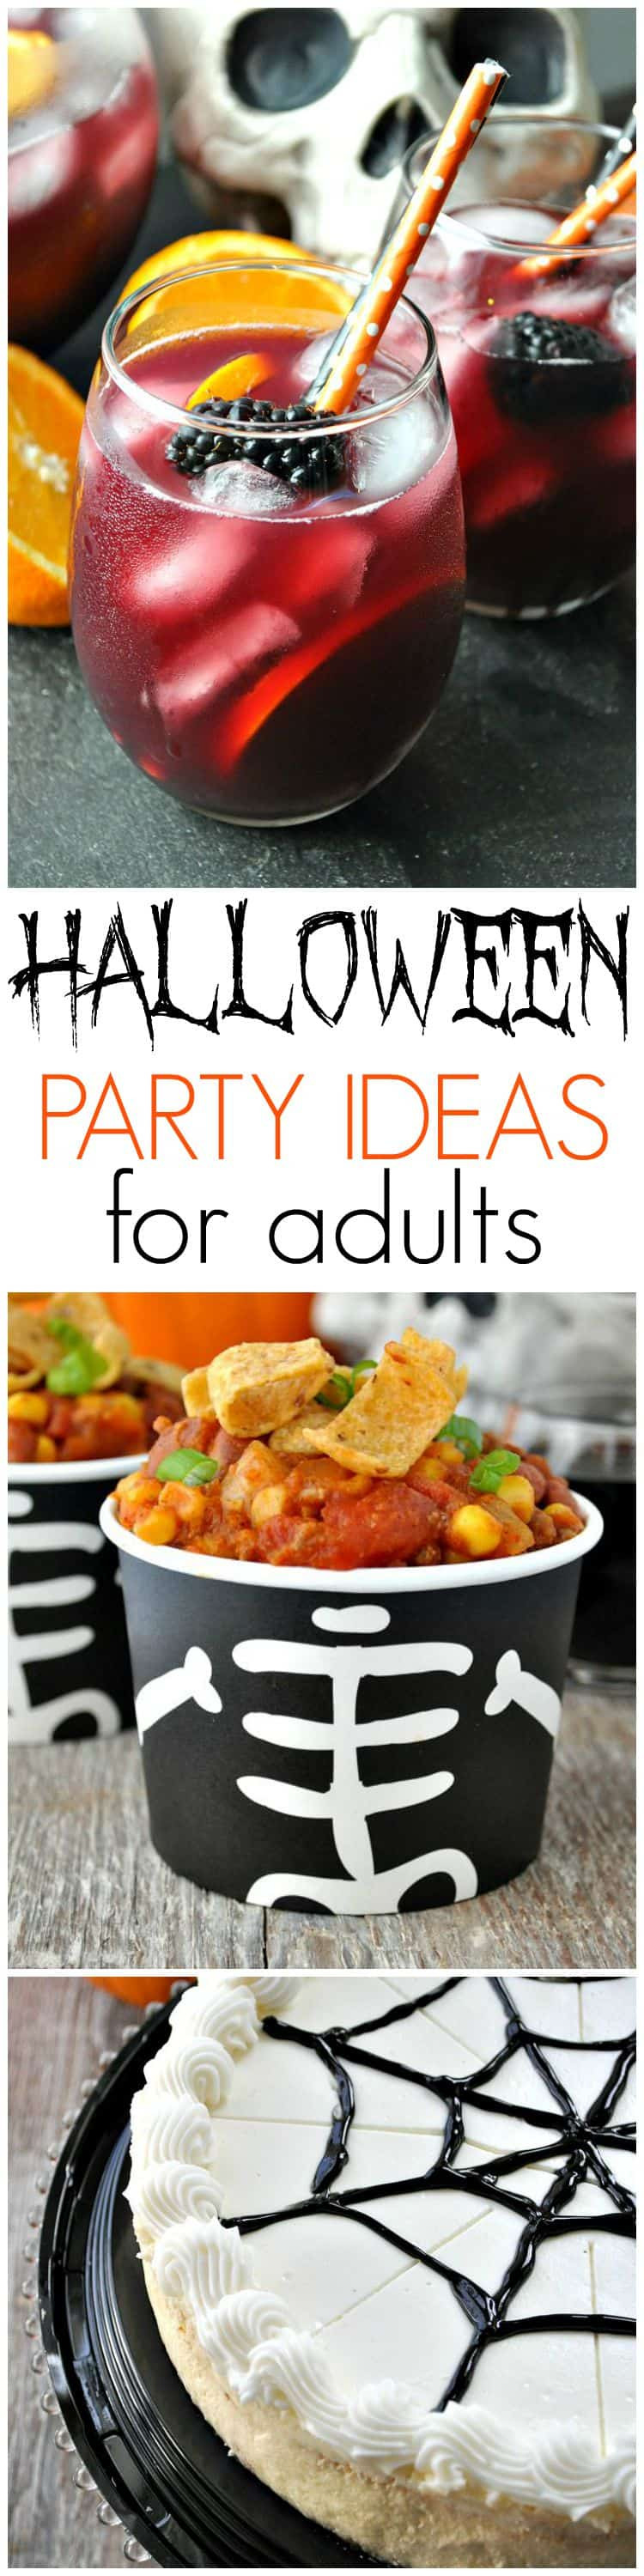 Halloween Party Ideas For Adults Decorations
 Slow Cooker Pumpkin Chili Halloween Party Ideas for